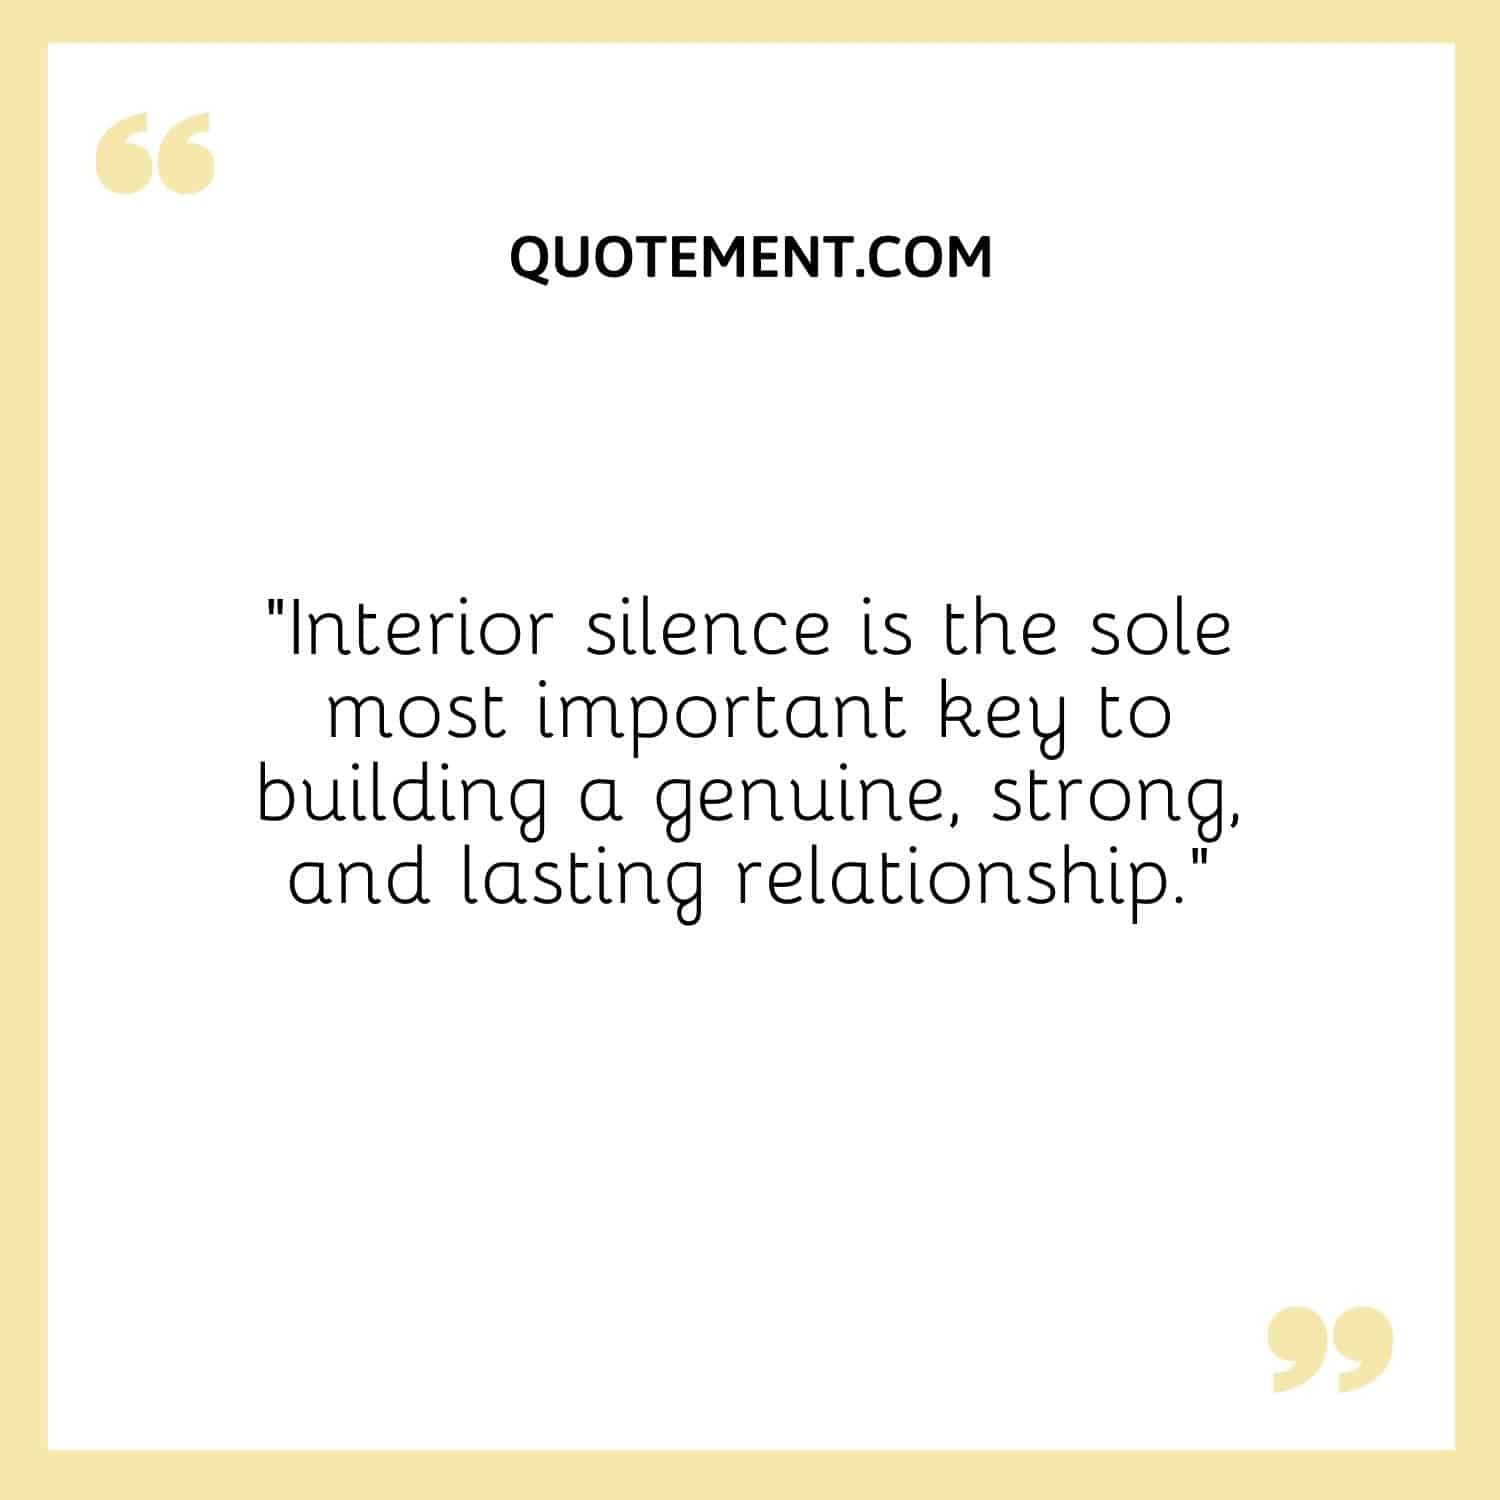 “Interior silence is the sole most important key to building a genuine, strong, and lasting relationship.”